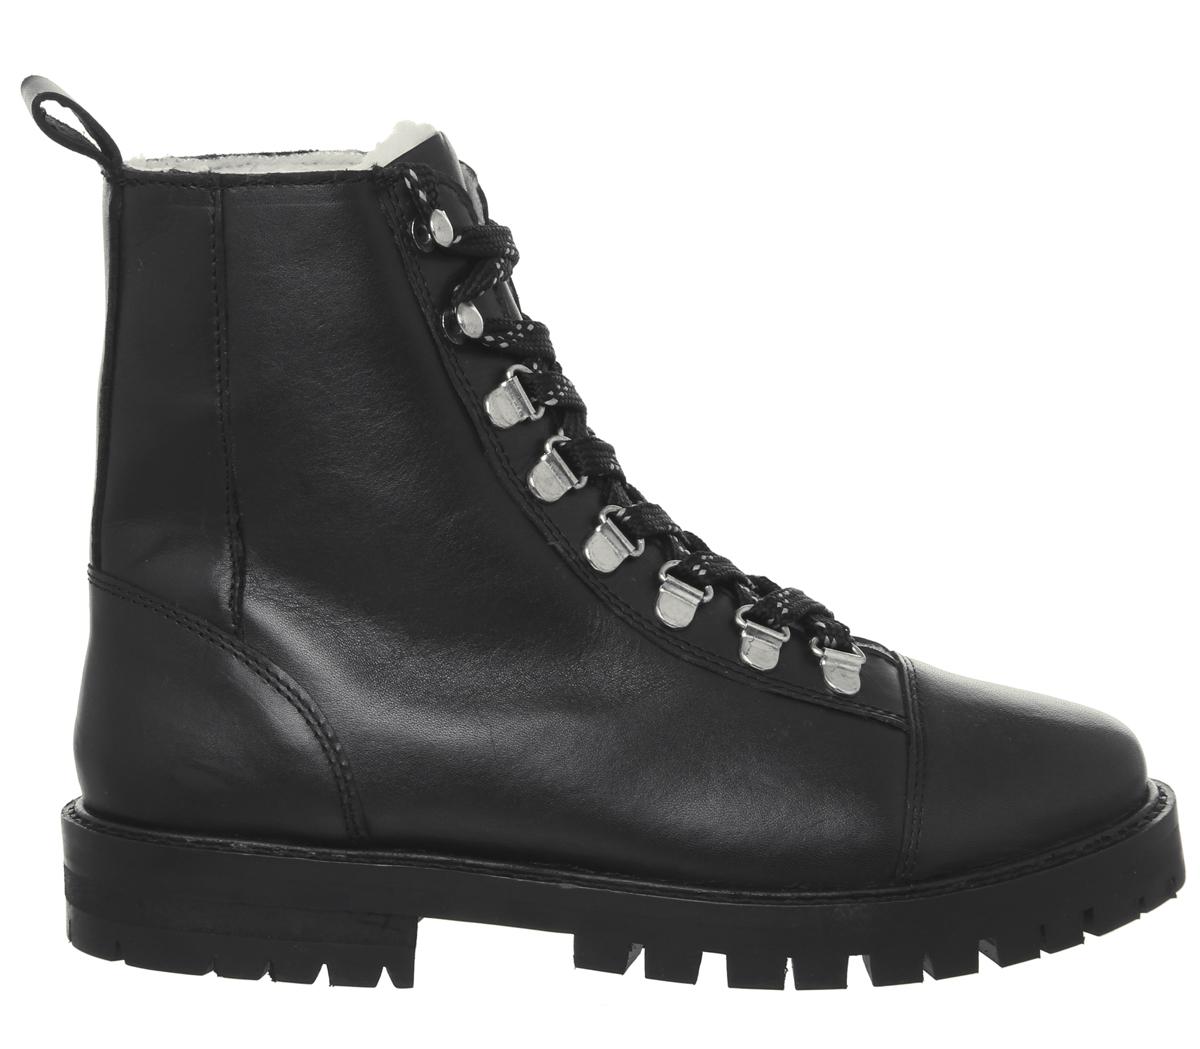 OFFICE Ansel Hiker Lace Up Boots Black Leather Natural Fur Lining ...